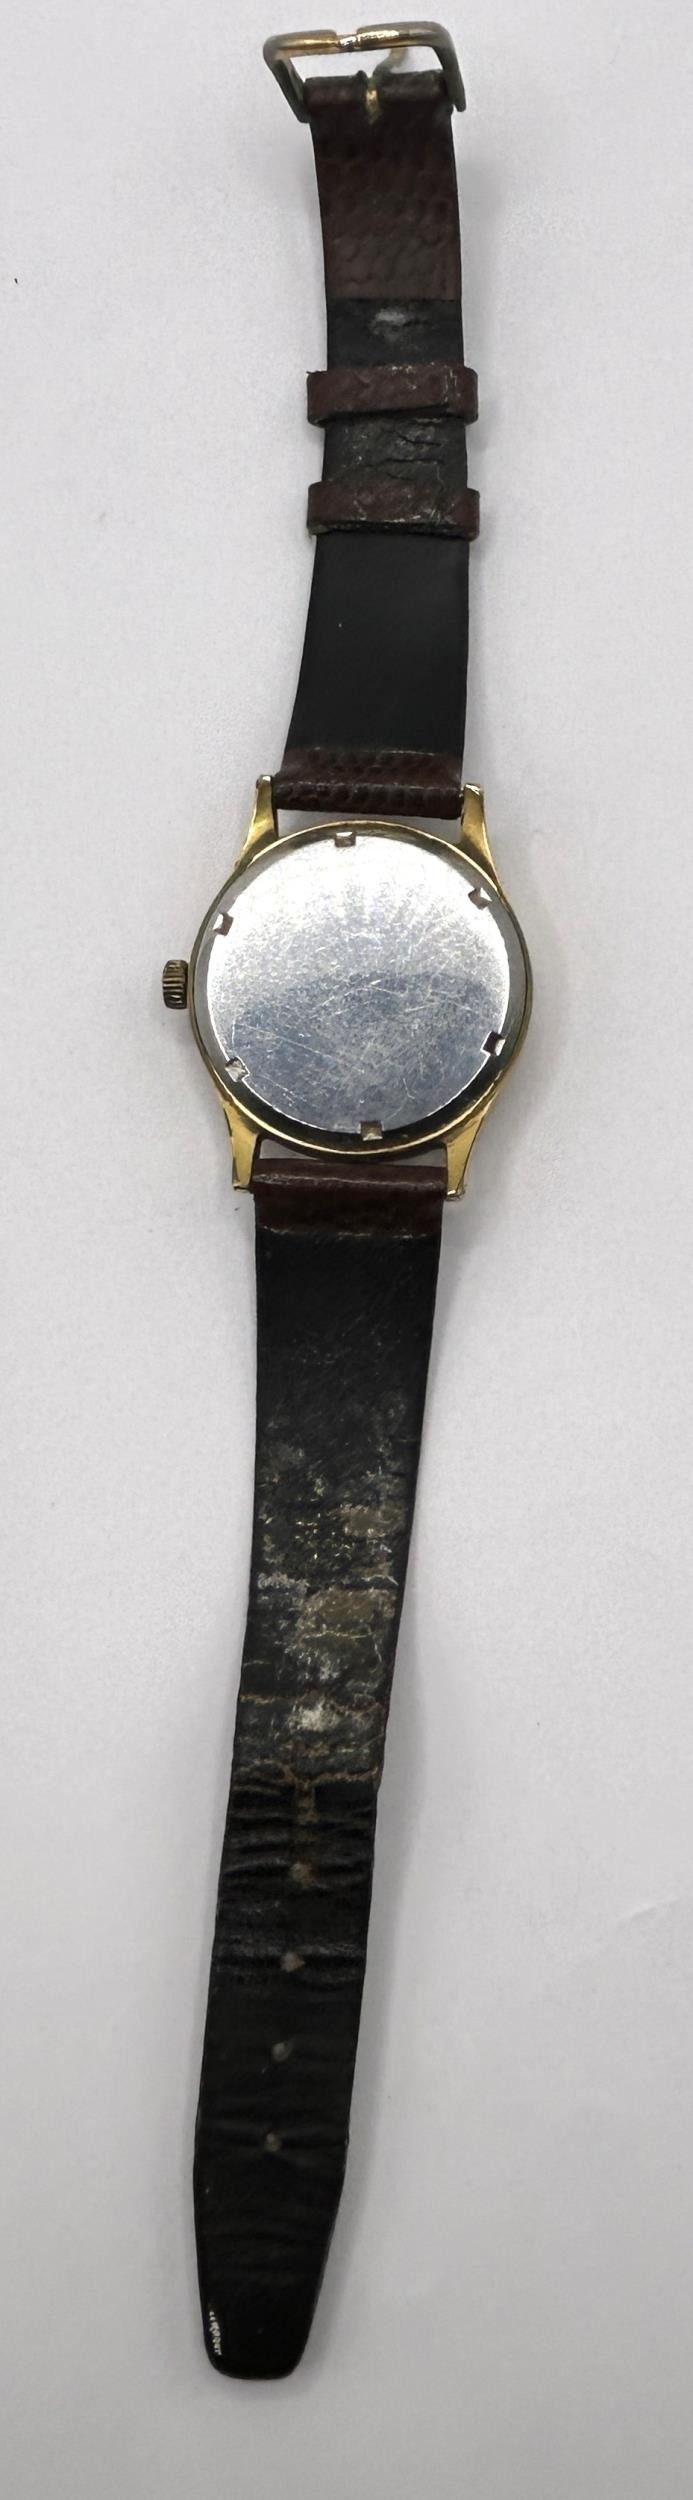 A gentleman's Smiths Deluxe wristwatch, on an associated leather strap - Image 2 of 3